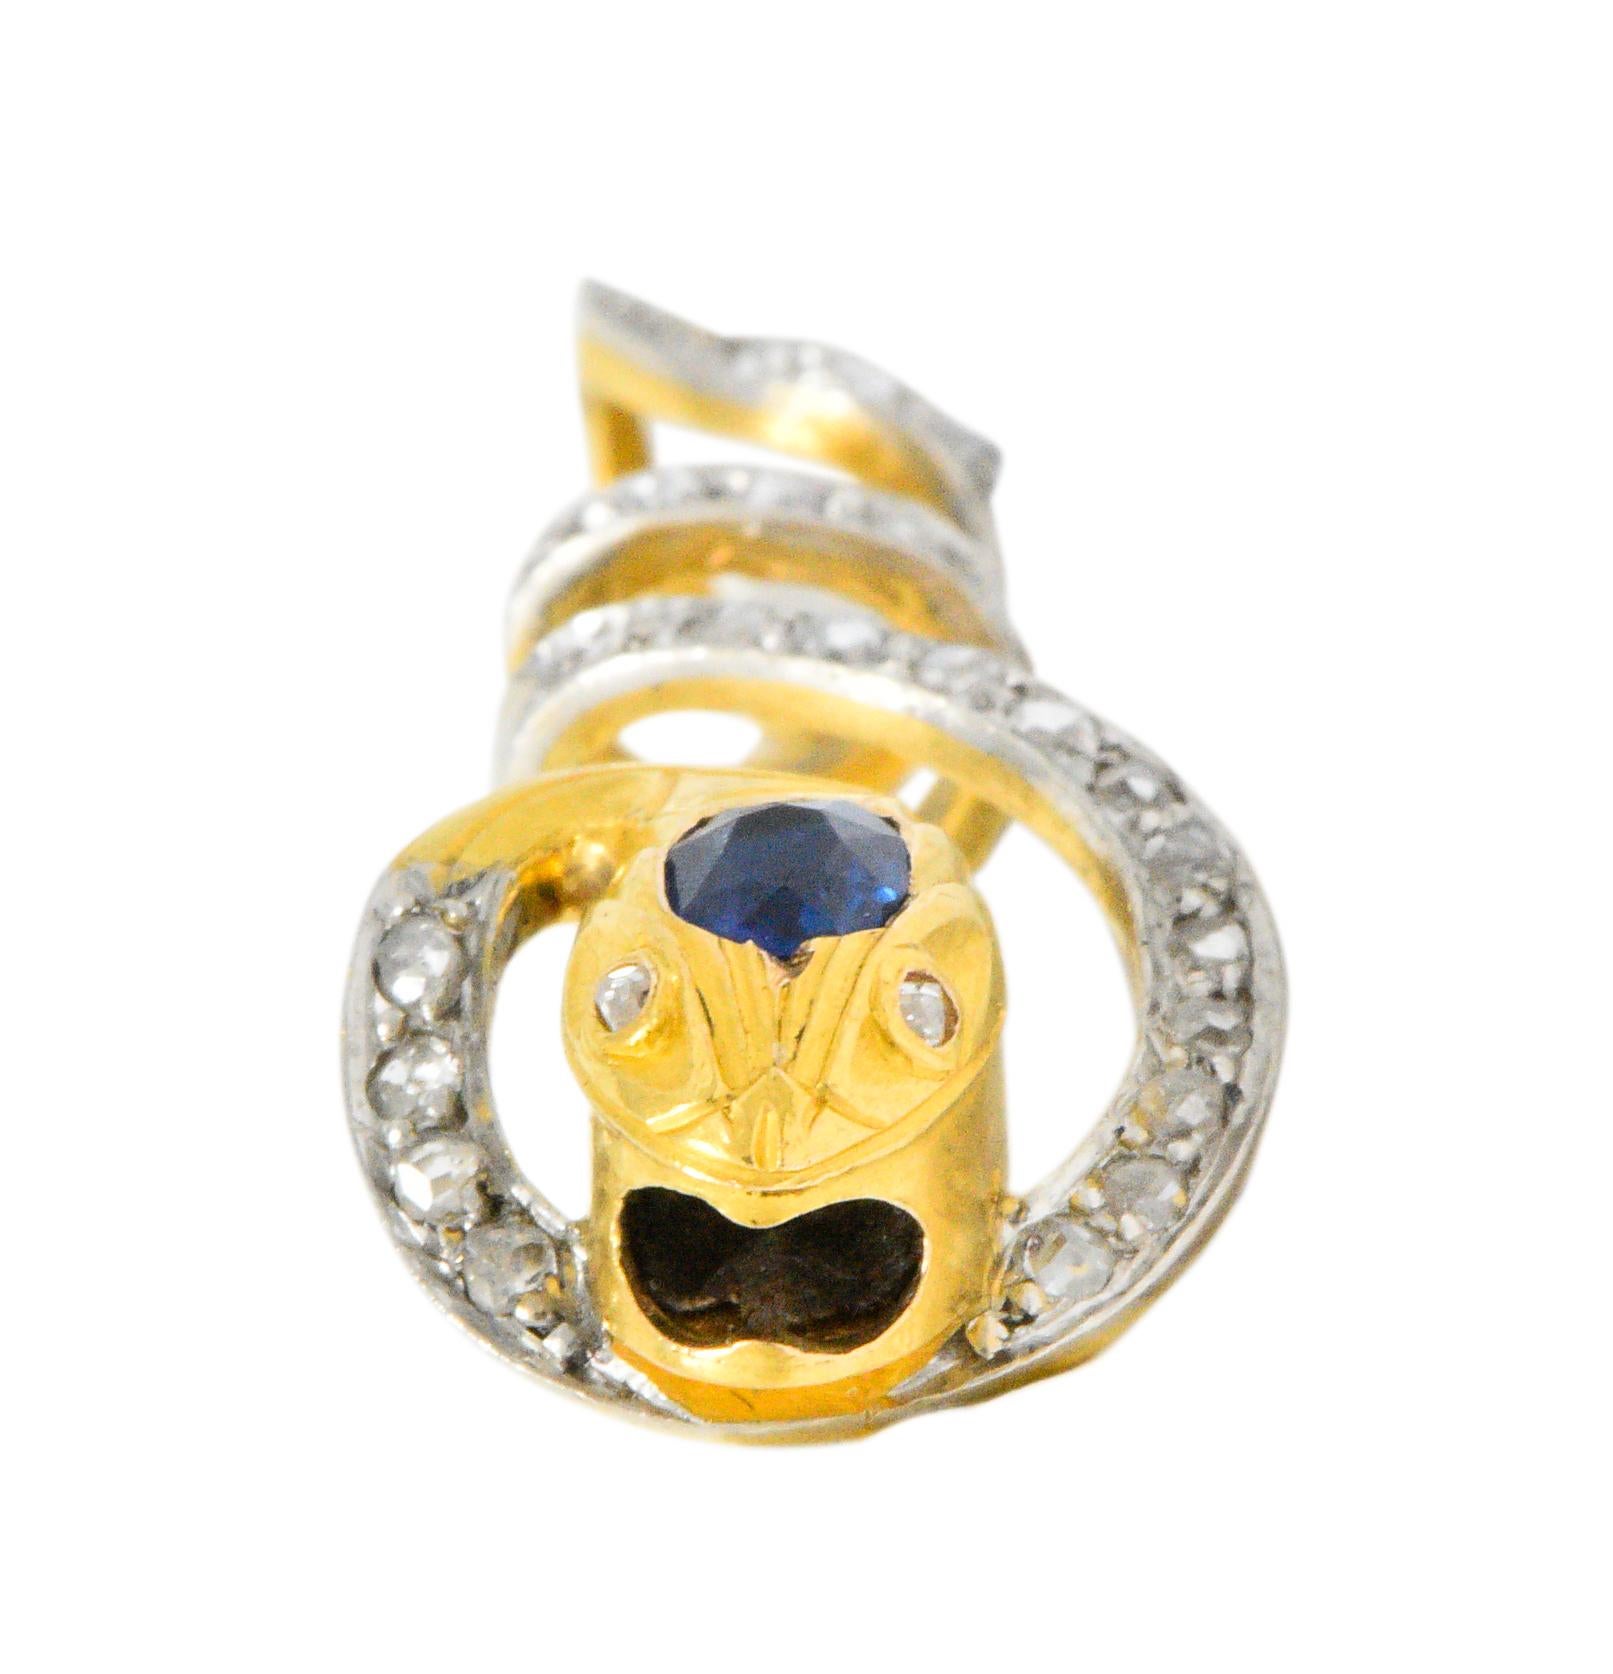 Designed as a coiled snake with an oval cut sapphire inset on the head of the snake, the sapphire weighing approximately 0.30 carats, bright blue

Accented with rose cut diamond eyes and along the body, weighing approximately 0.15 carats, eye-clean